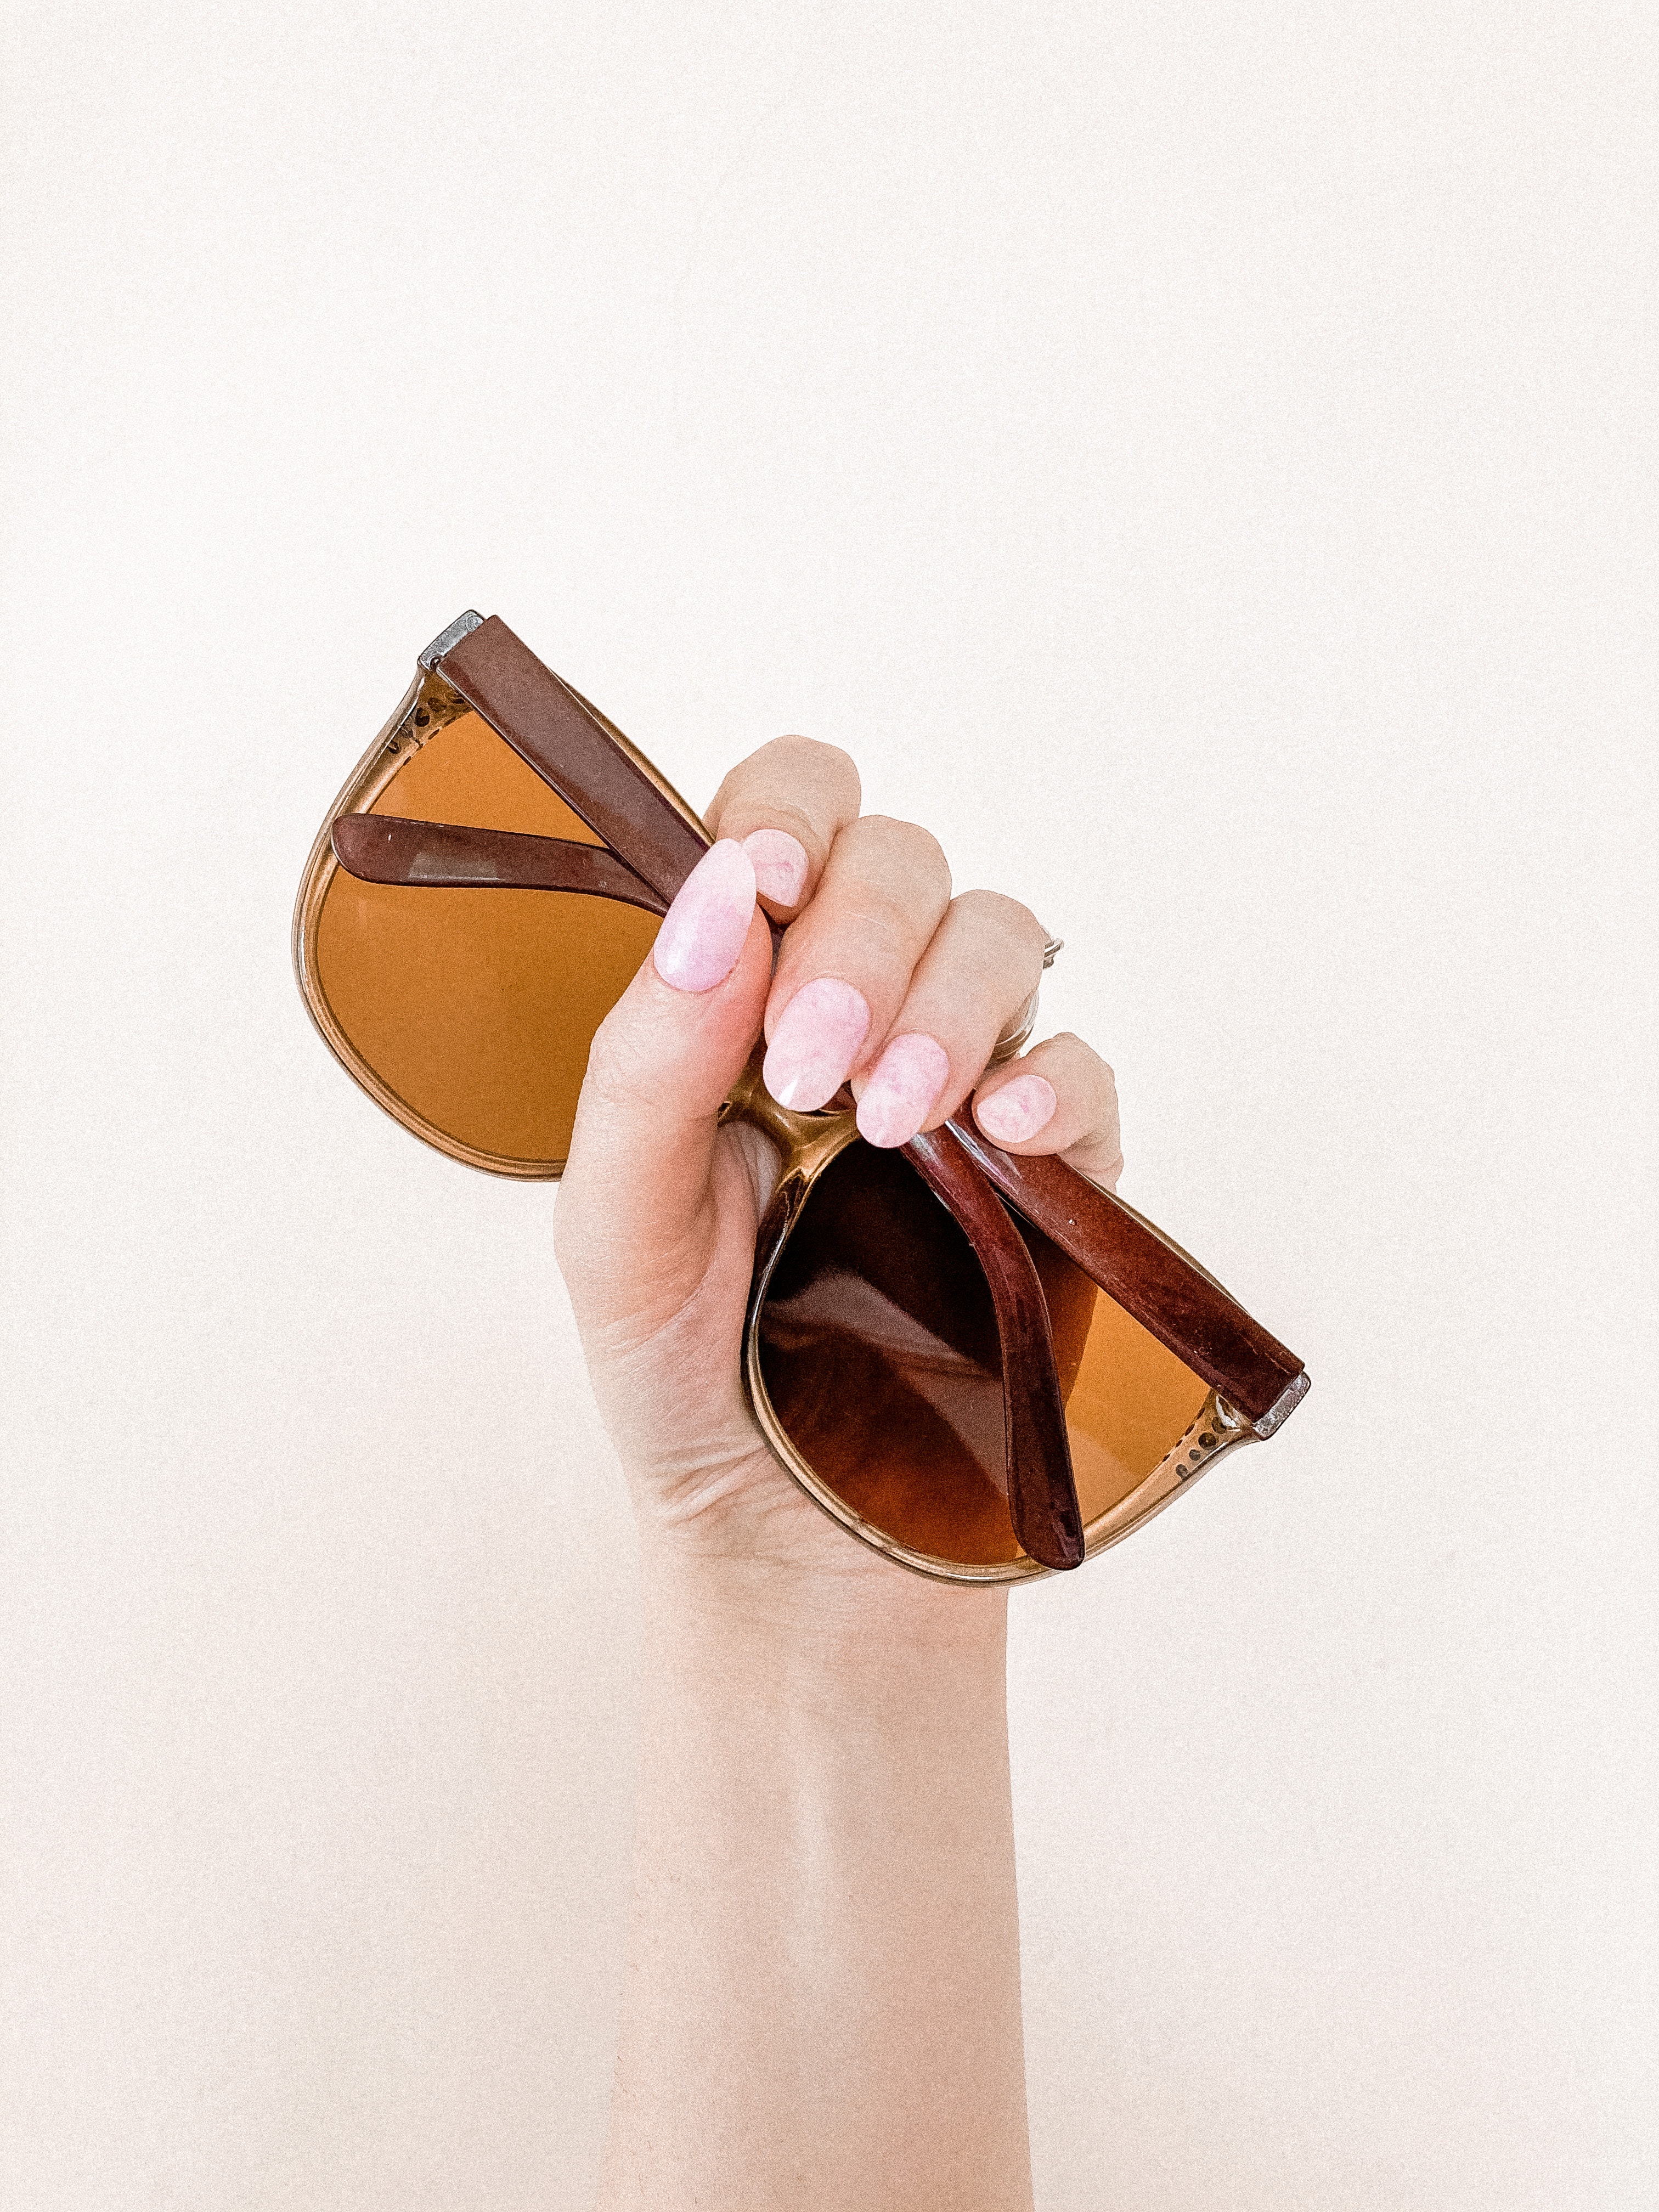 An image of a hand holding a sunglasses. | Source: pexels